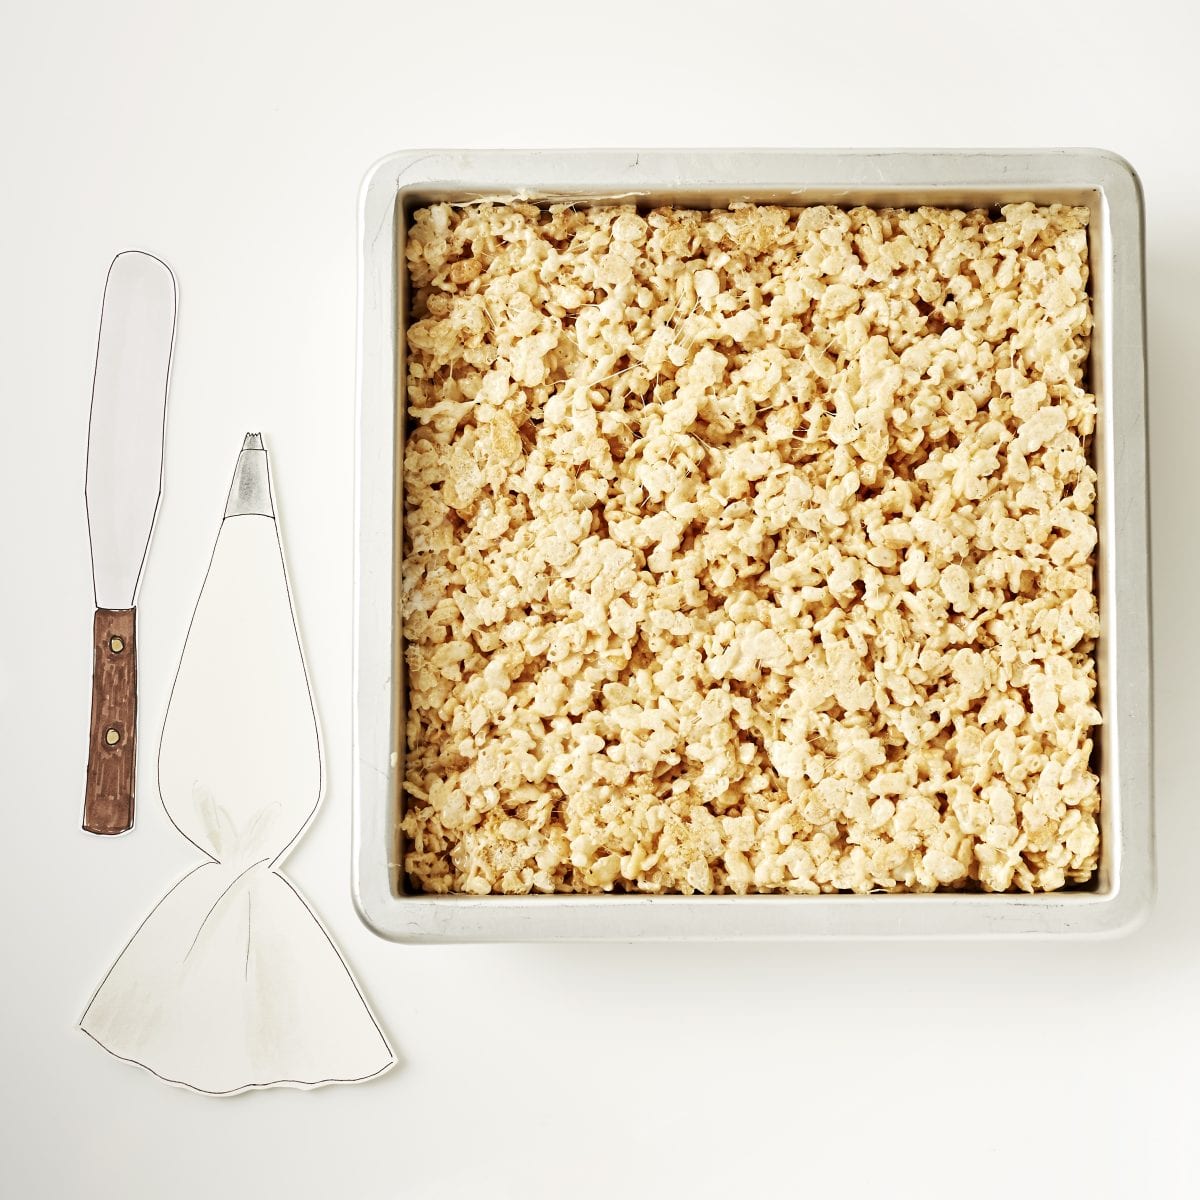 Darcy Miller Designs_Rice krispies, party favor, party treat, easy snack, creative decoration, holiday snack, birthday